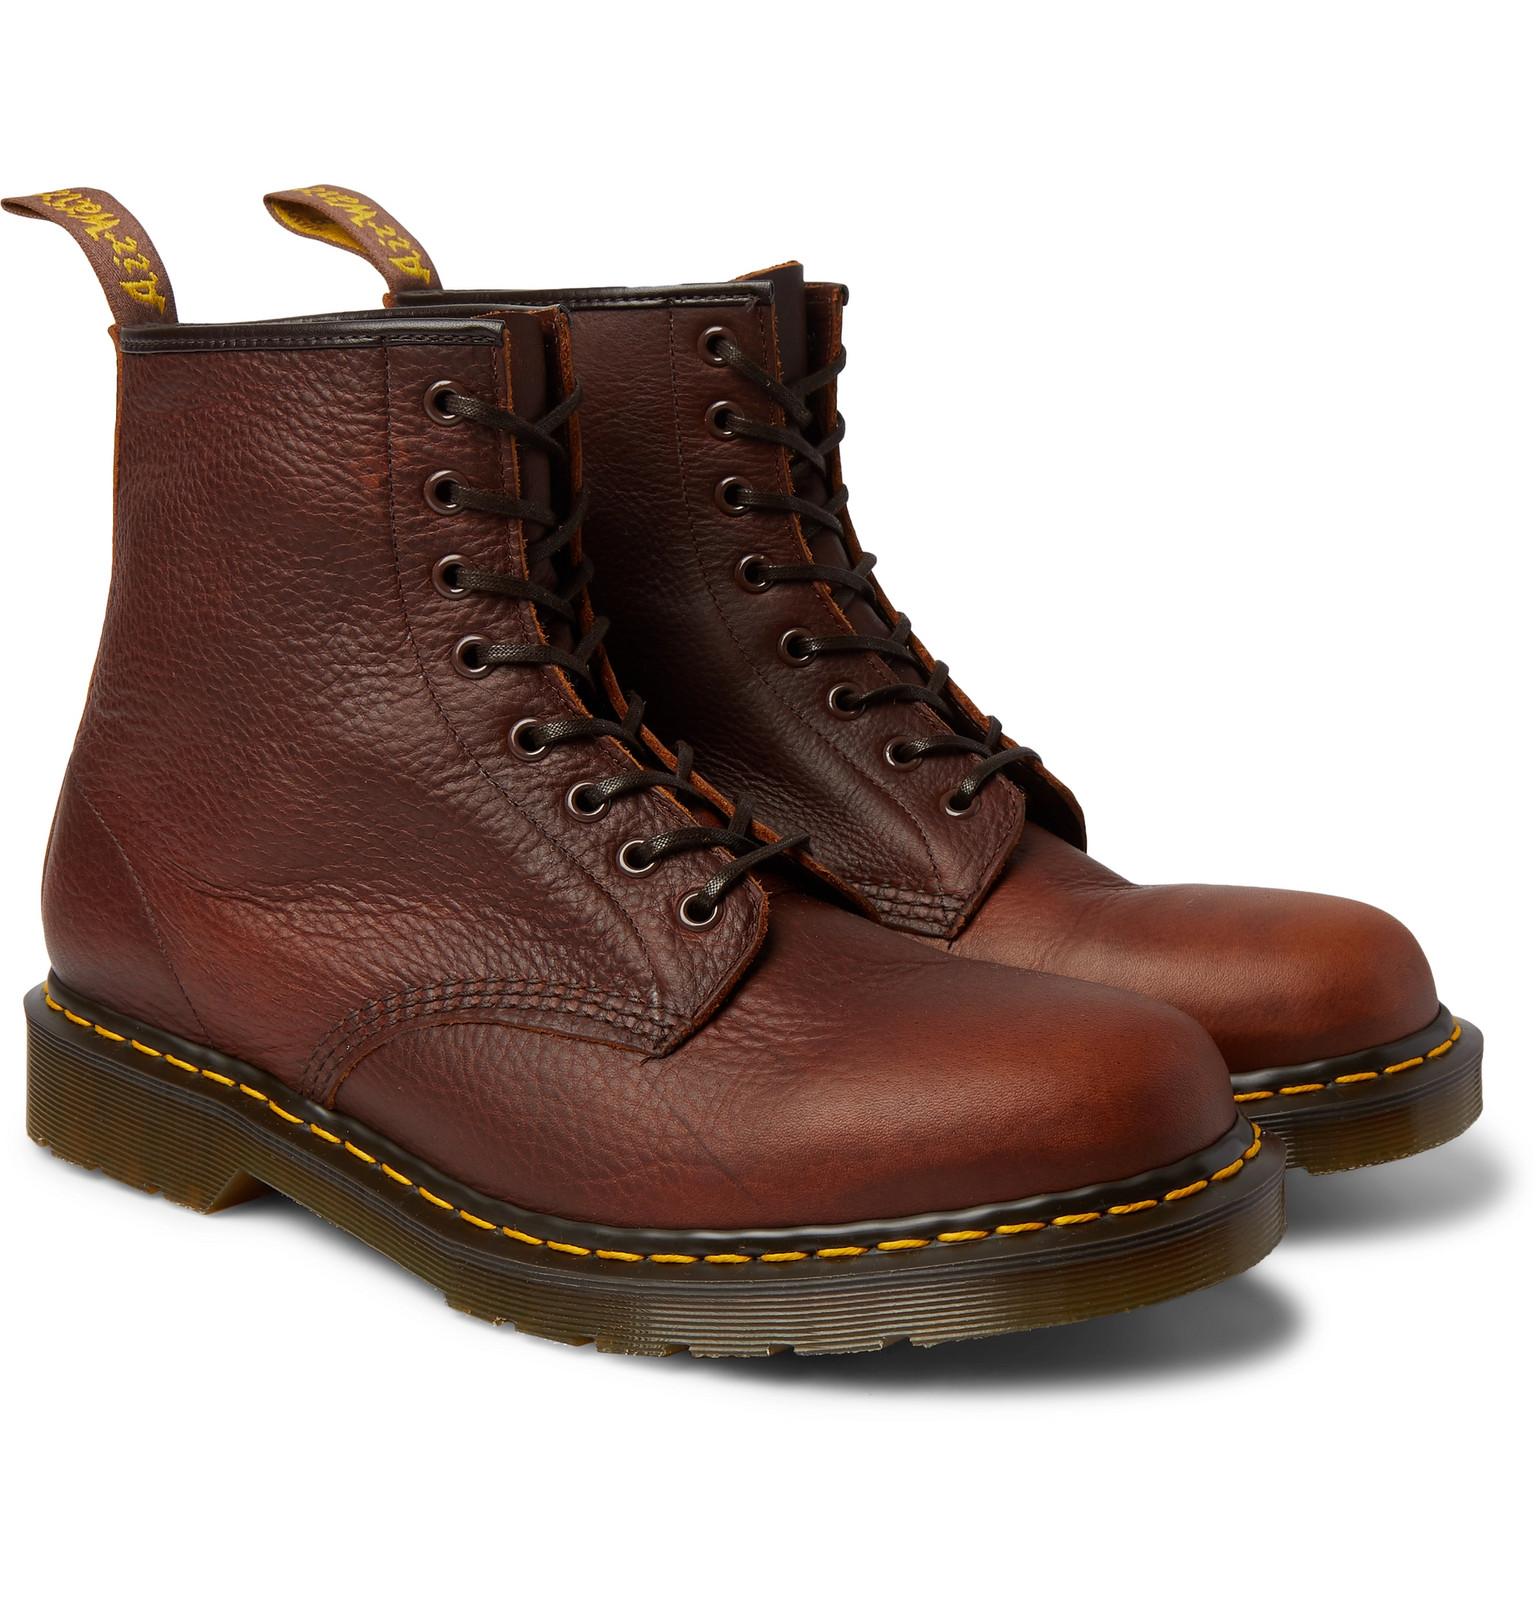 Dr. Martens 1460 Full-grain Leather Boots in Brown for Men - Lyst